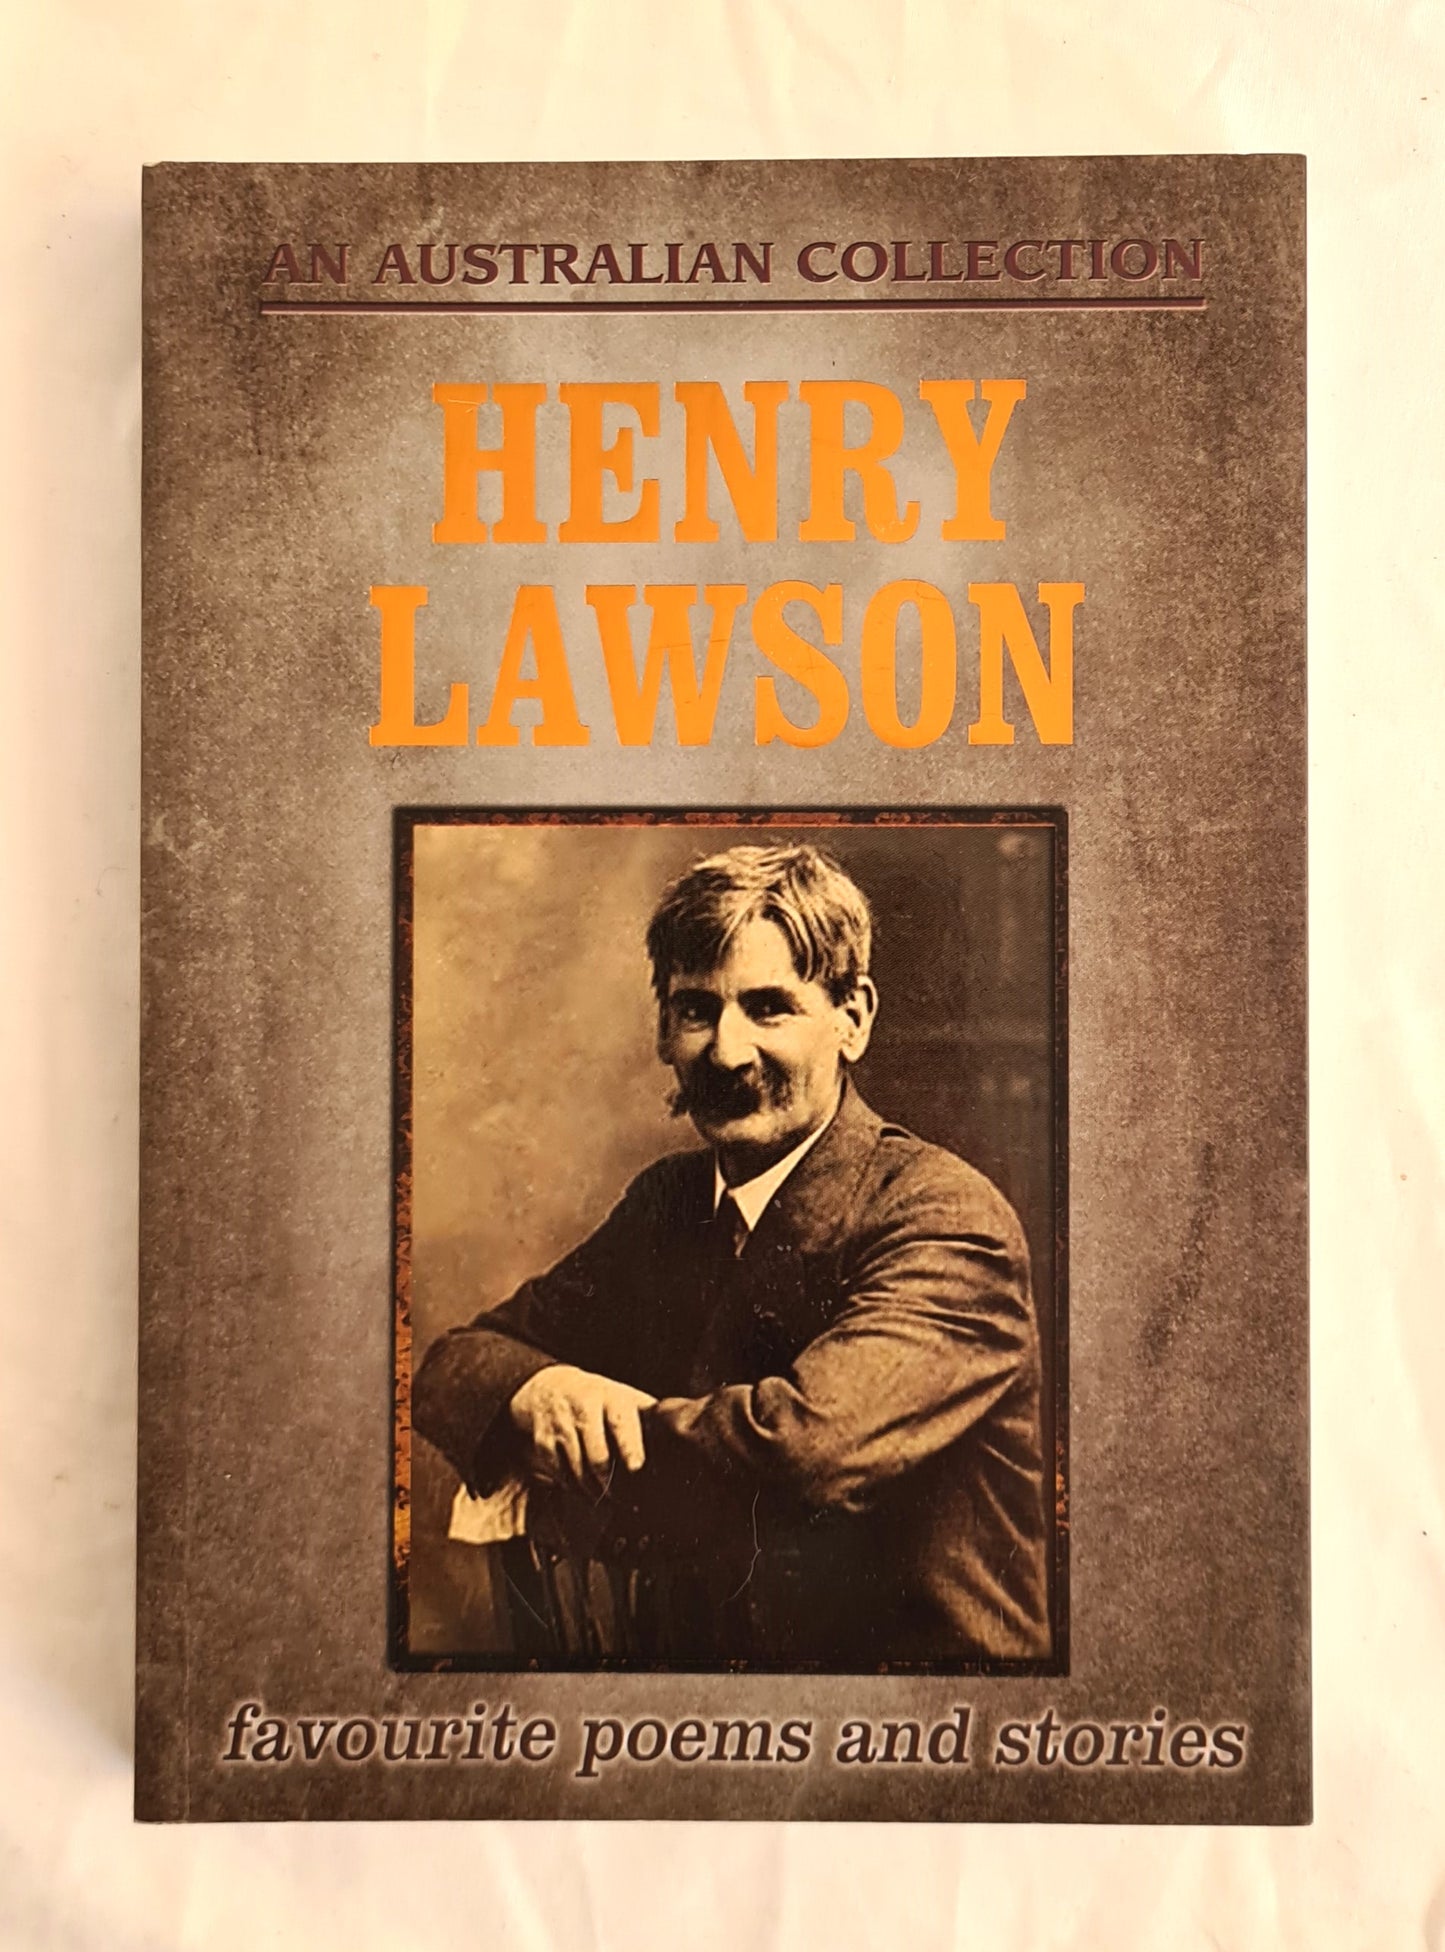 Henry Lawson Collected Works  Favourite poems and stories  An Australian Collection